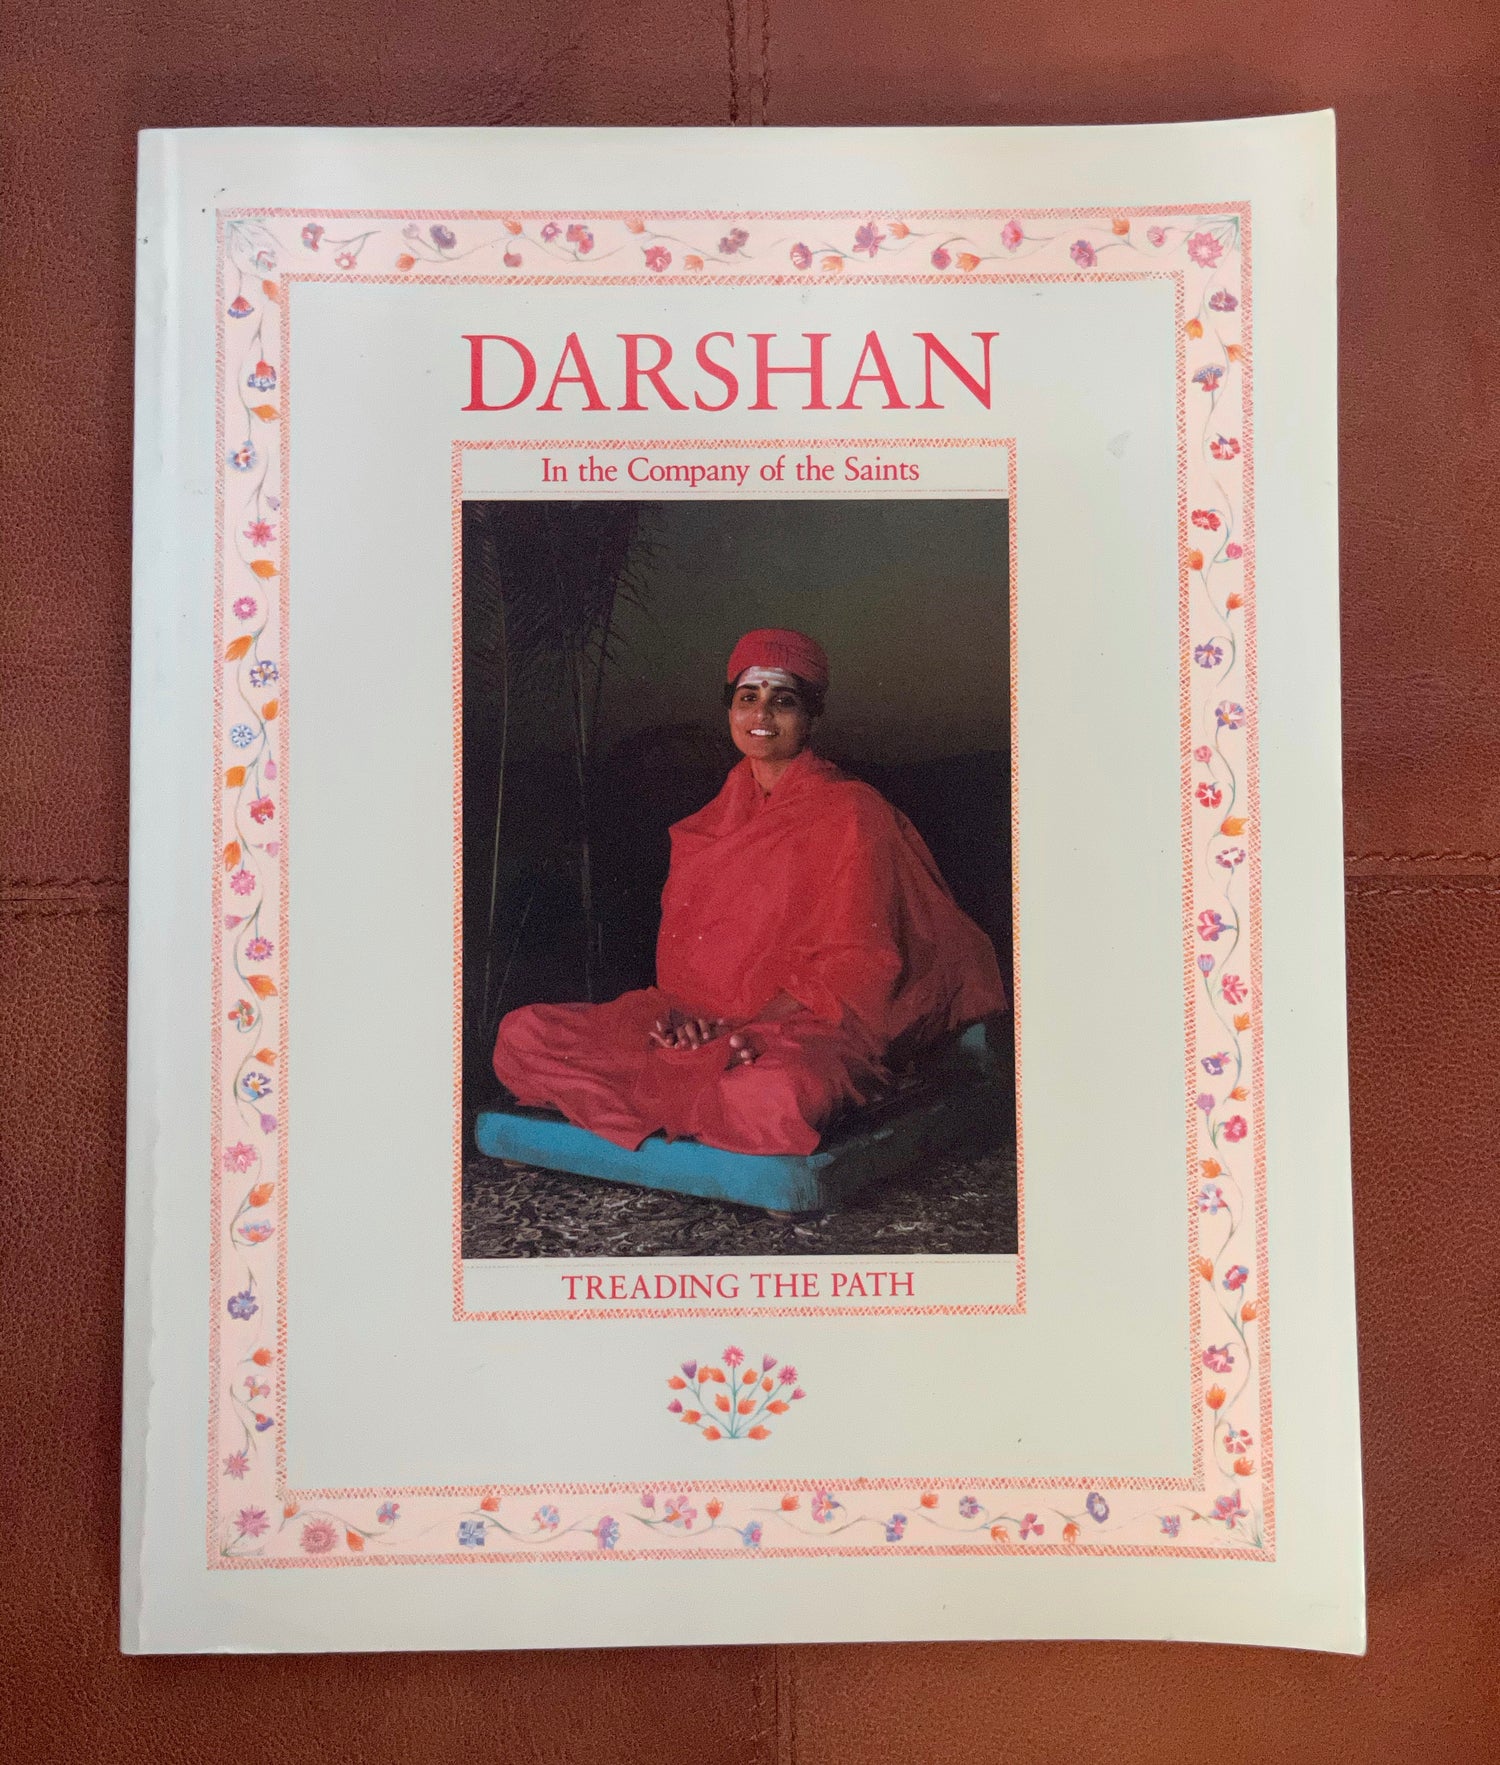 Darshan Magazine, In The Company of The Saints, Treading The Path